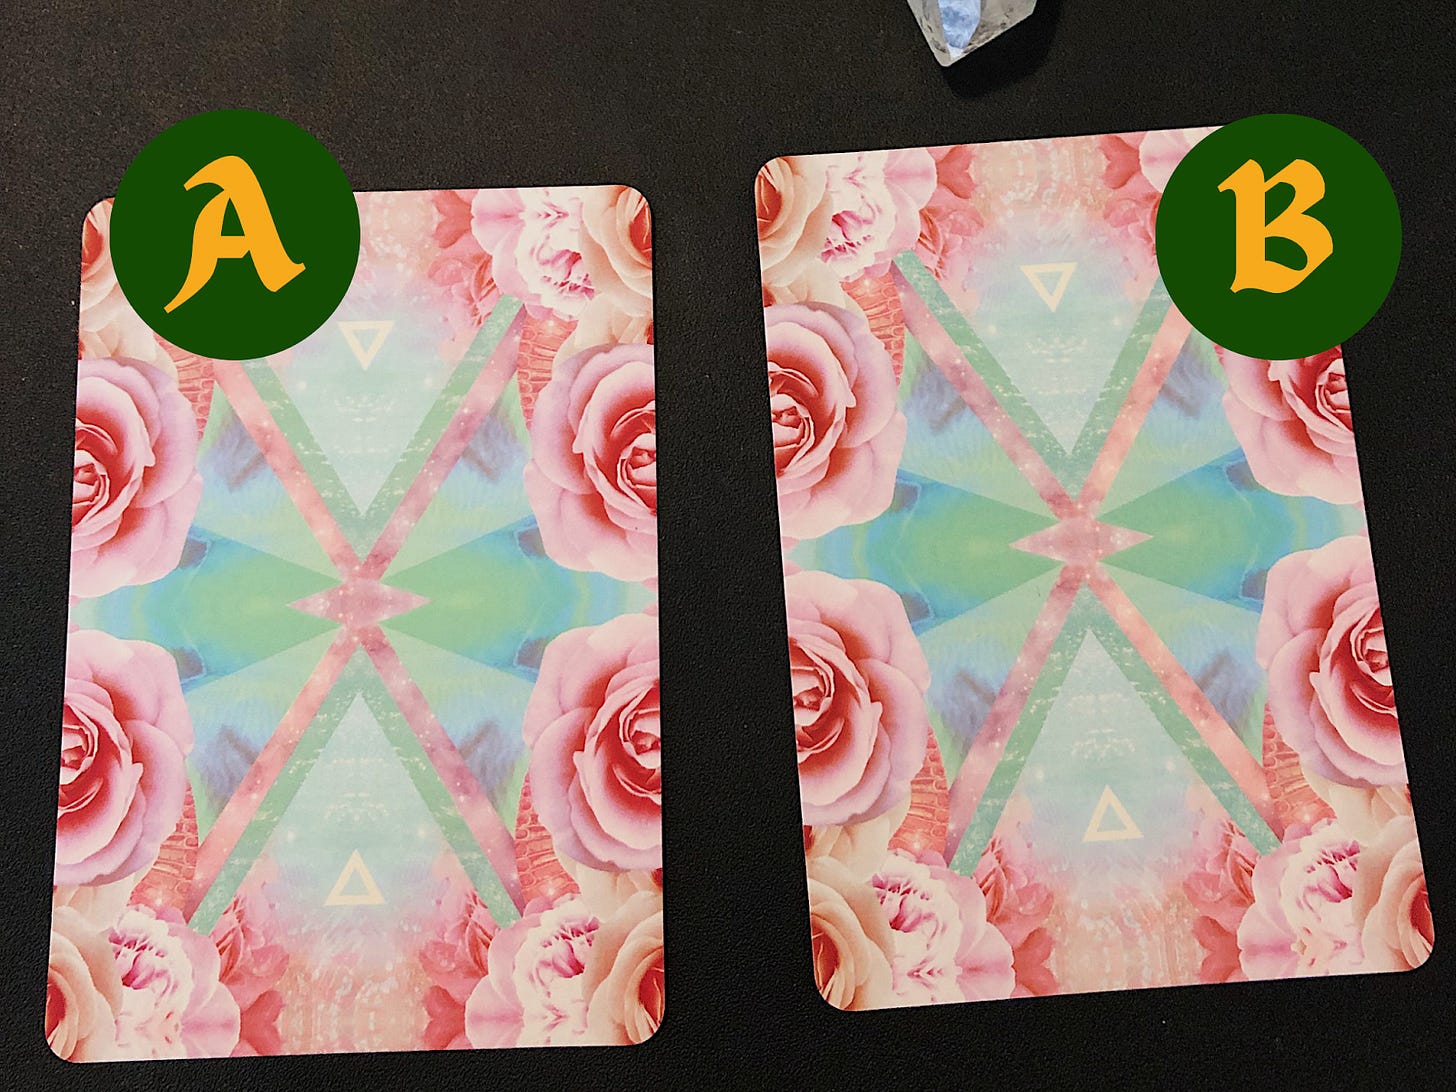 Two down-facing oracle cards with the lefthand one saying "A" and the righthand one saying "B."